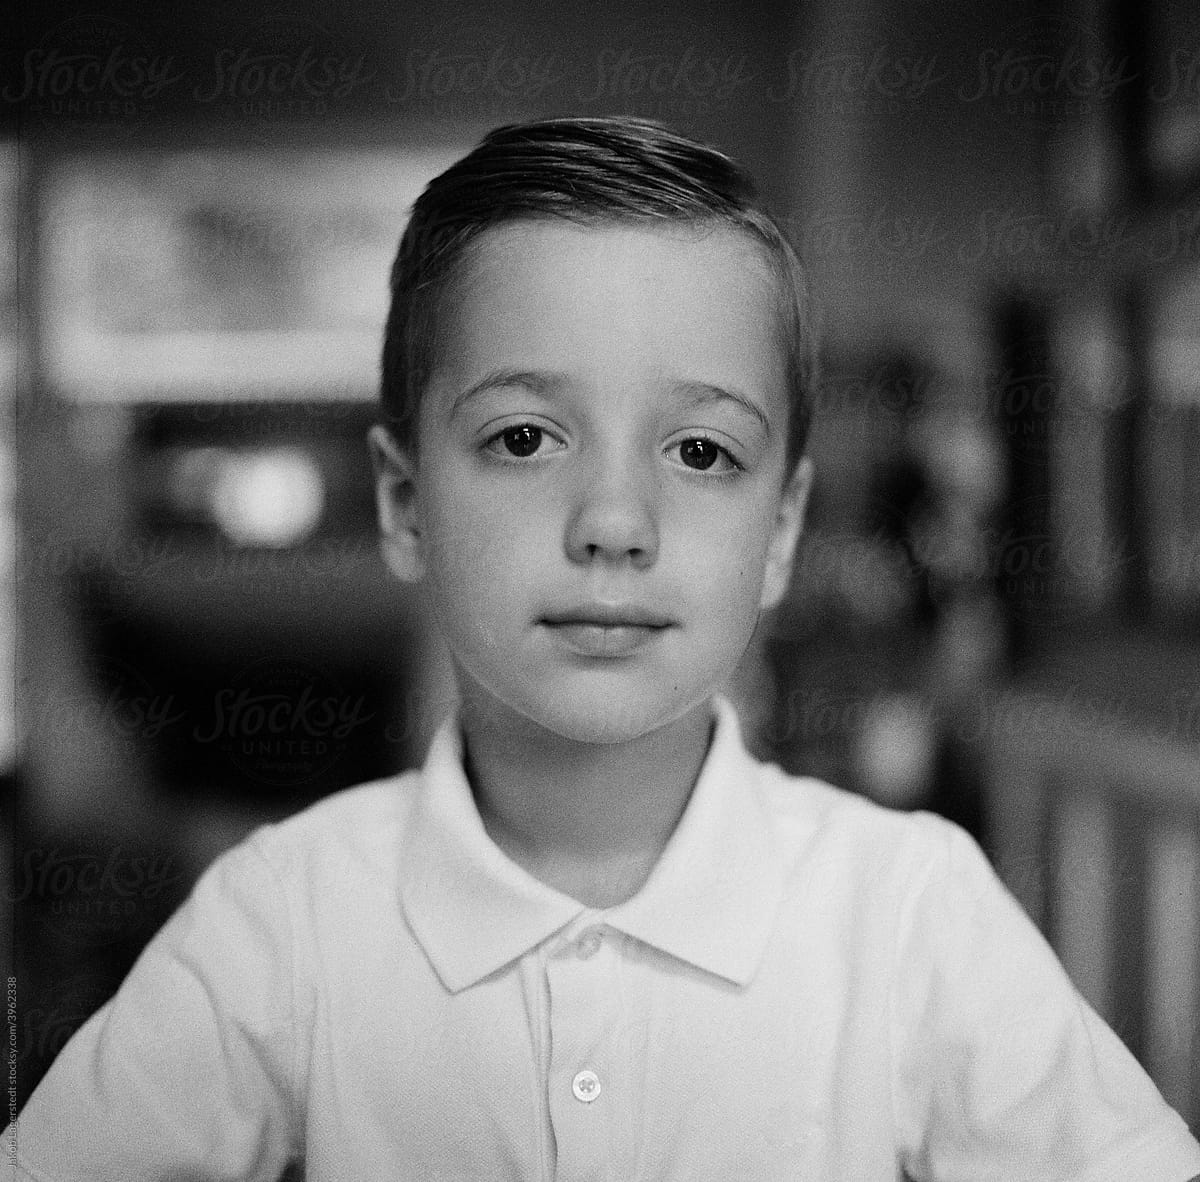 Black and white portrait of a handsome young boy in a white polo shirt